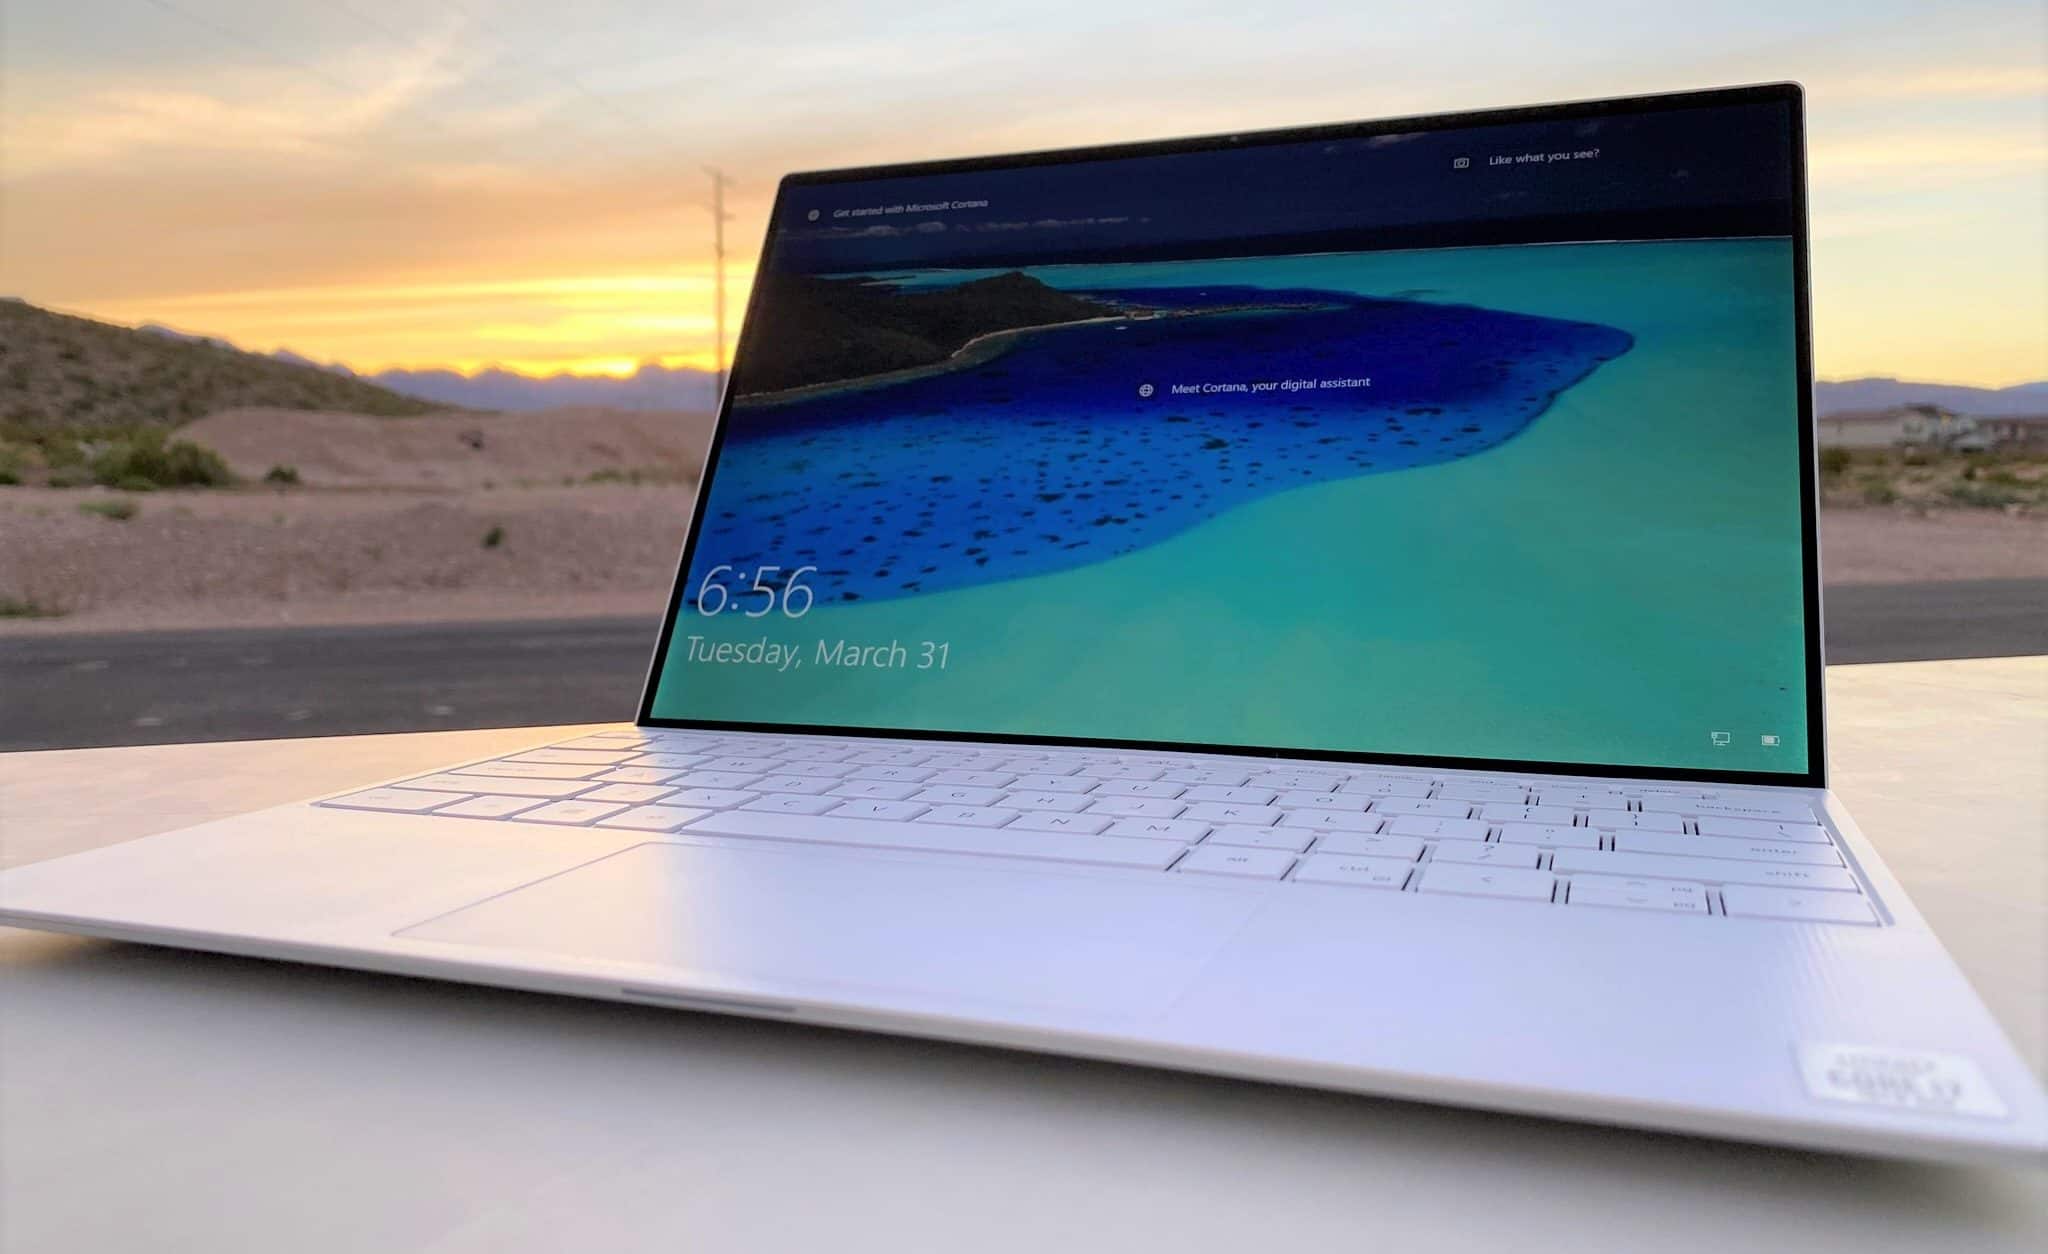 The New Dell XPS 13 Laptop Sees Notable Improvements for 2020